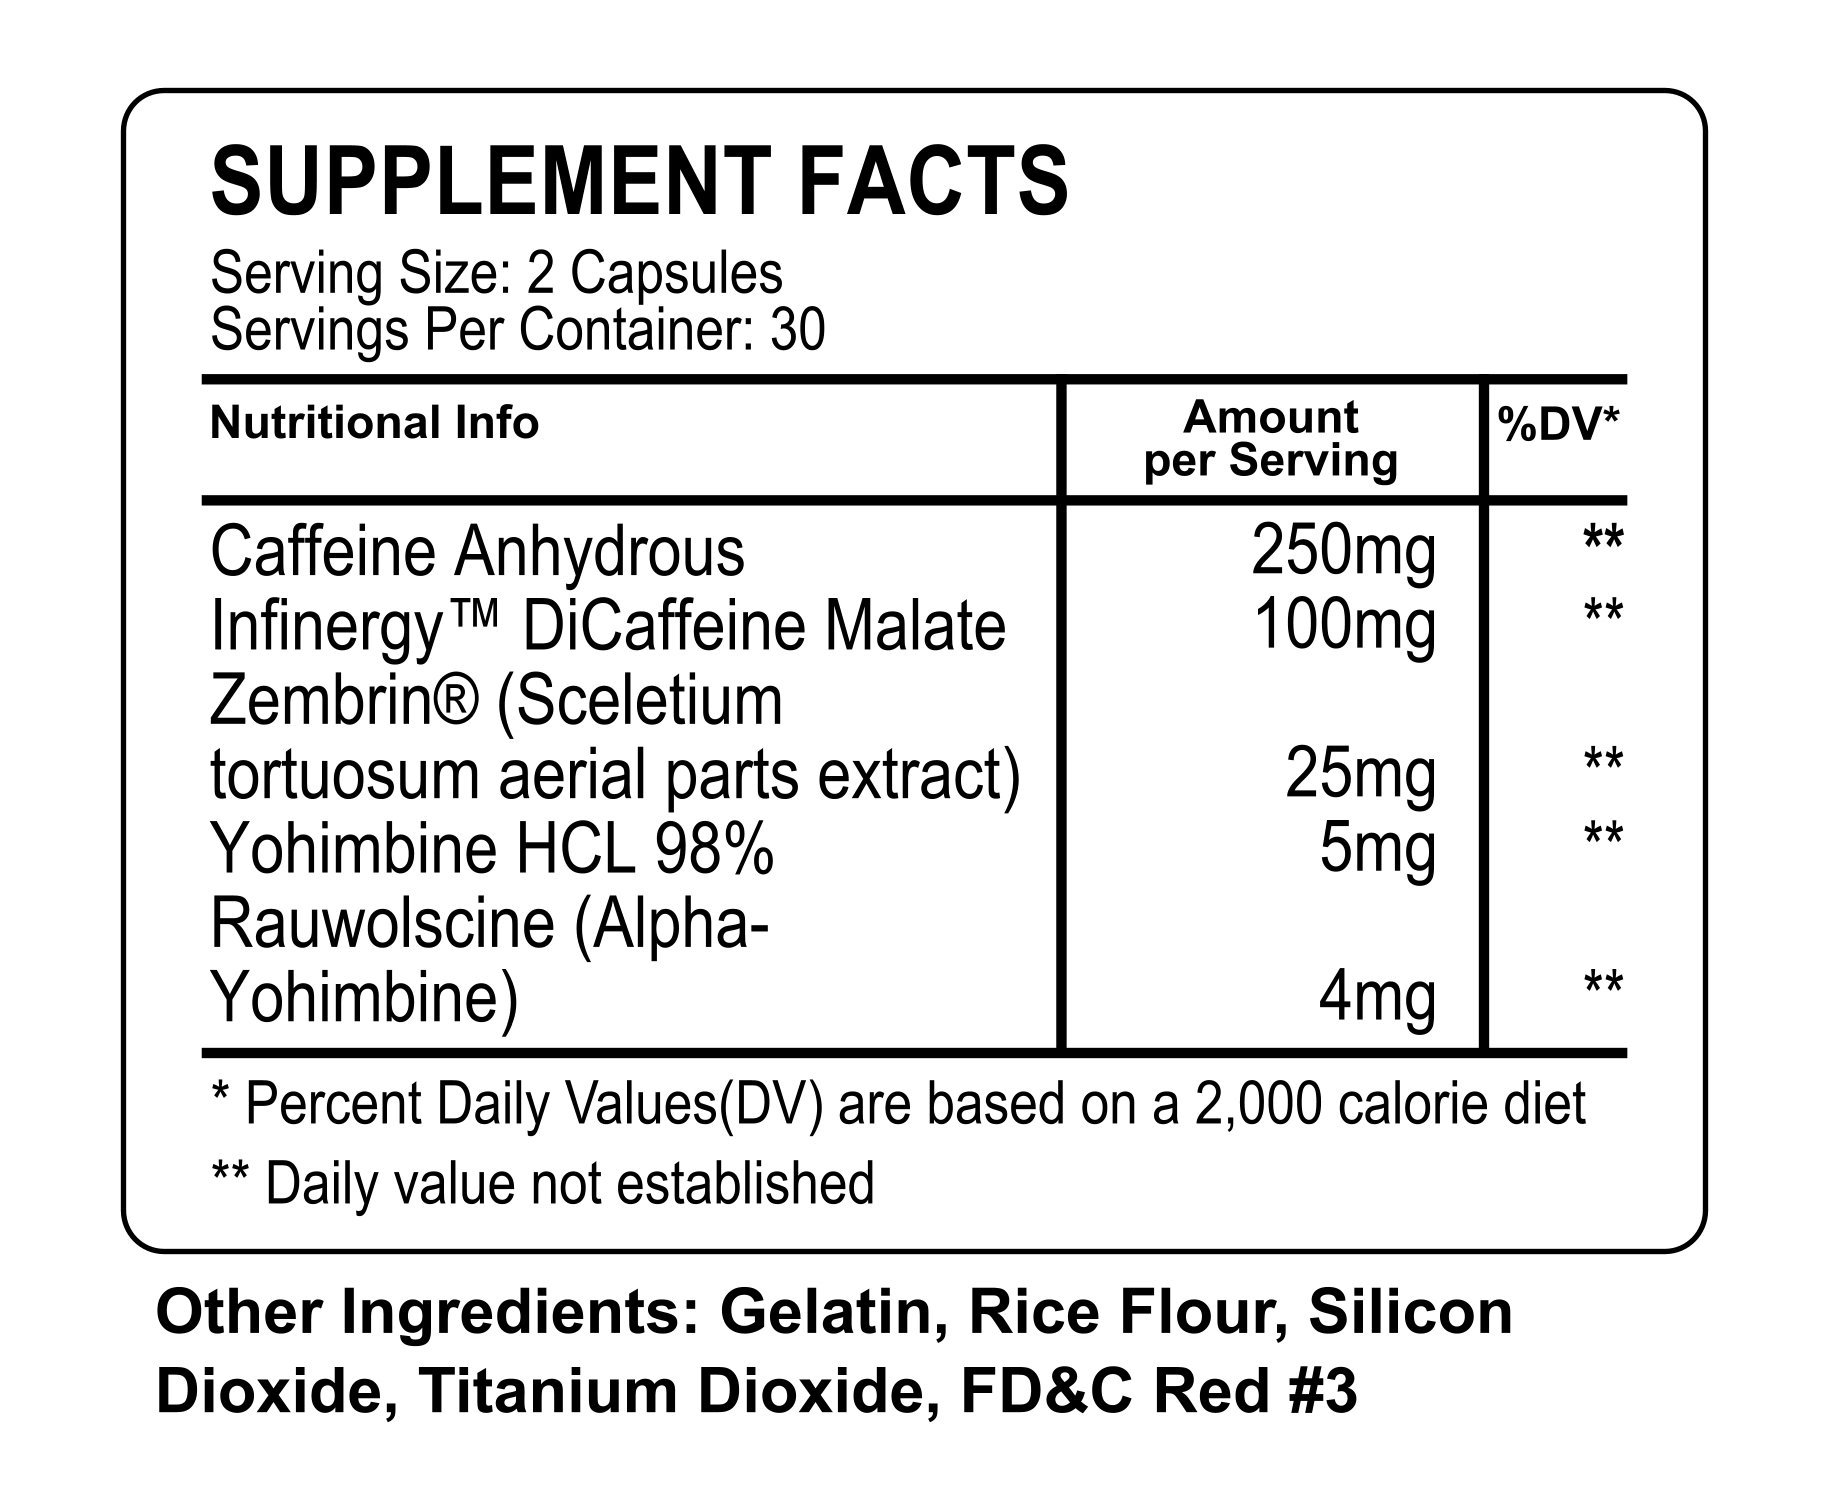 Supplement facts for a 30-serving product. Ingredients include caffeine anhydrous, Infinergy™ DiCaffeine Malate, Zembrin®, Yohimbine HCL, and Rauwolscine.